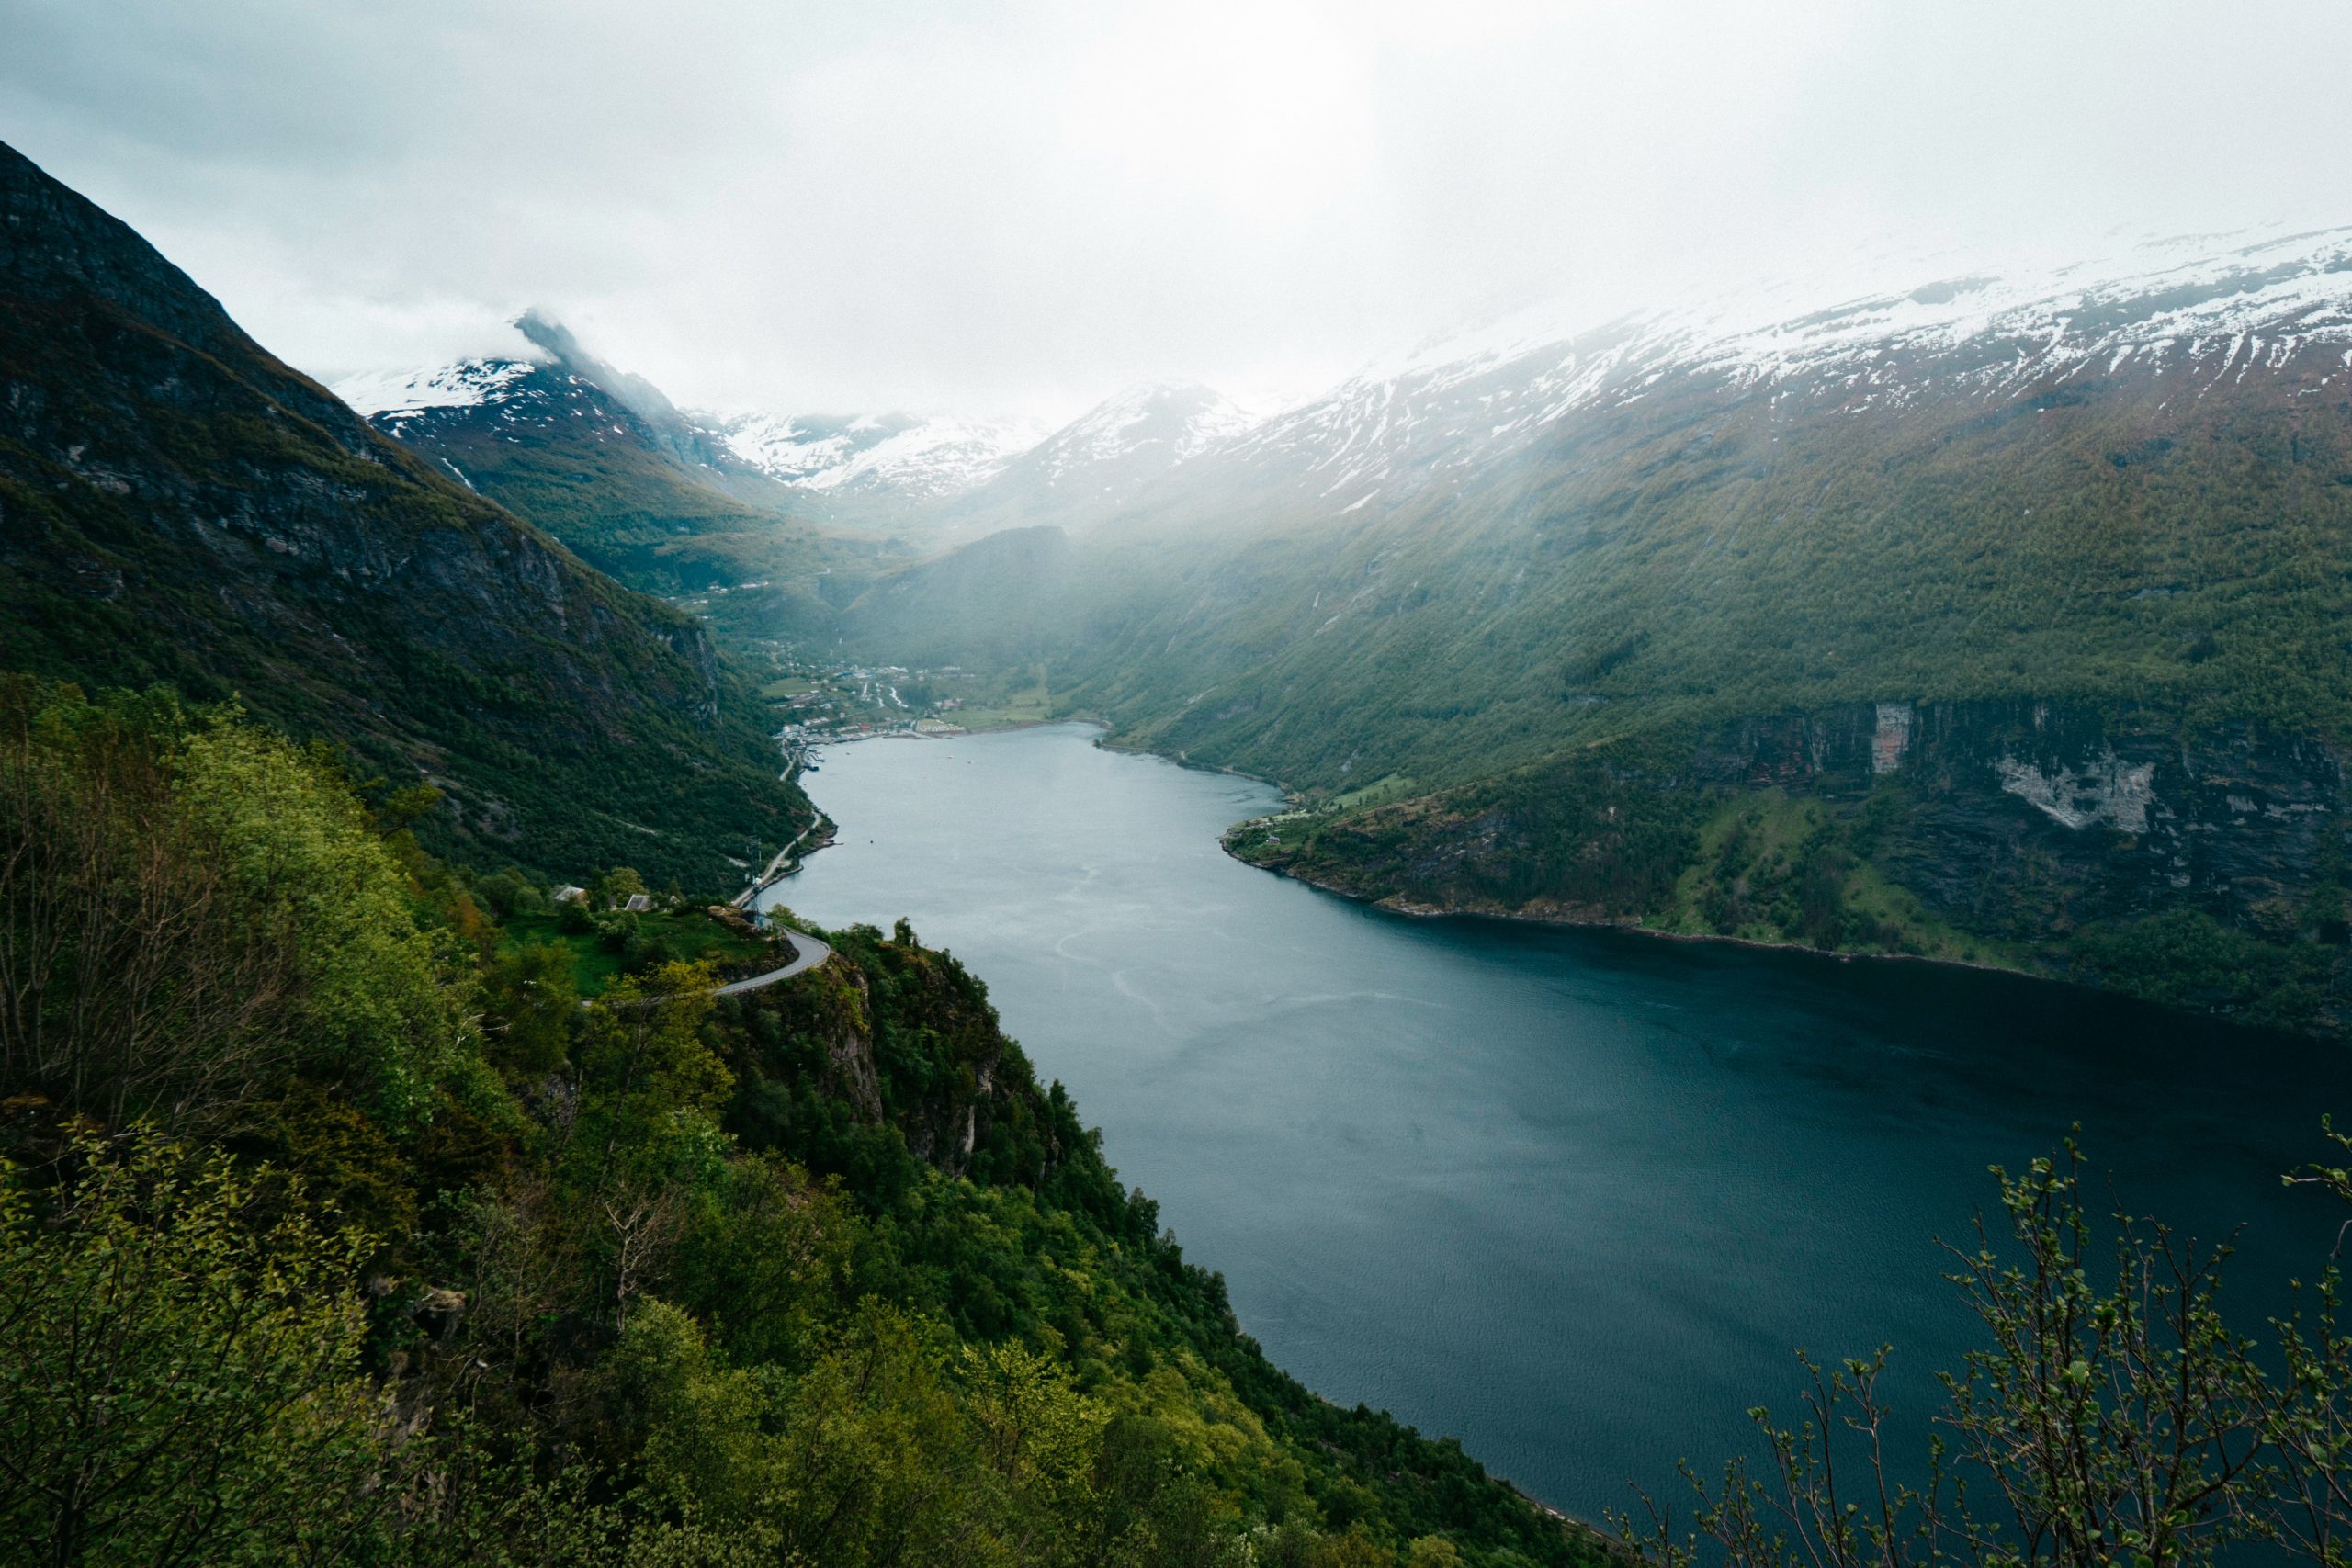 explore the breathtaking fjords with our travel guides and discover the natural beauty of norway.